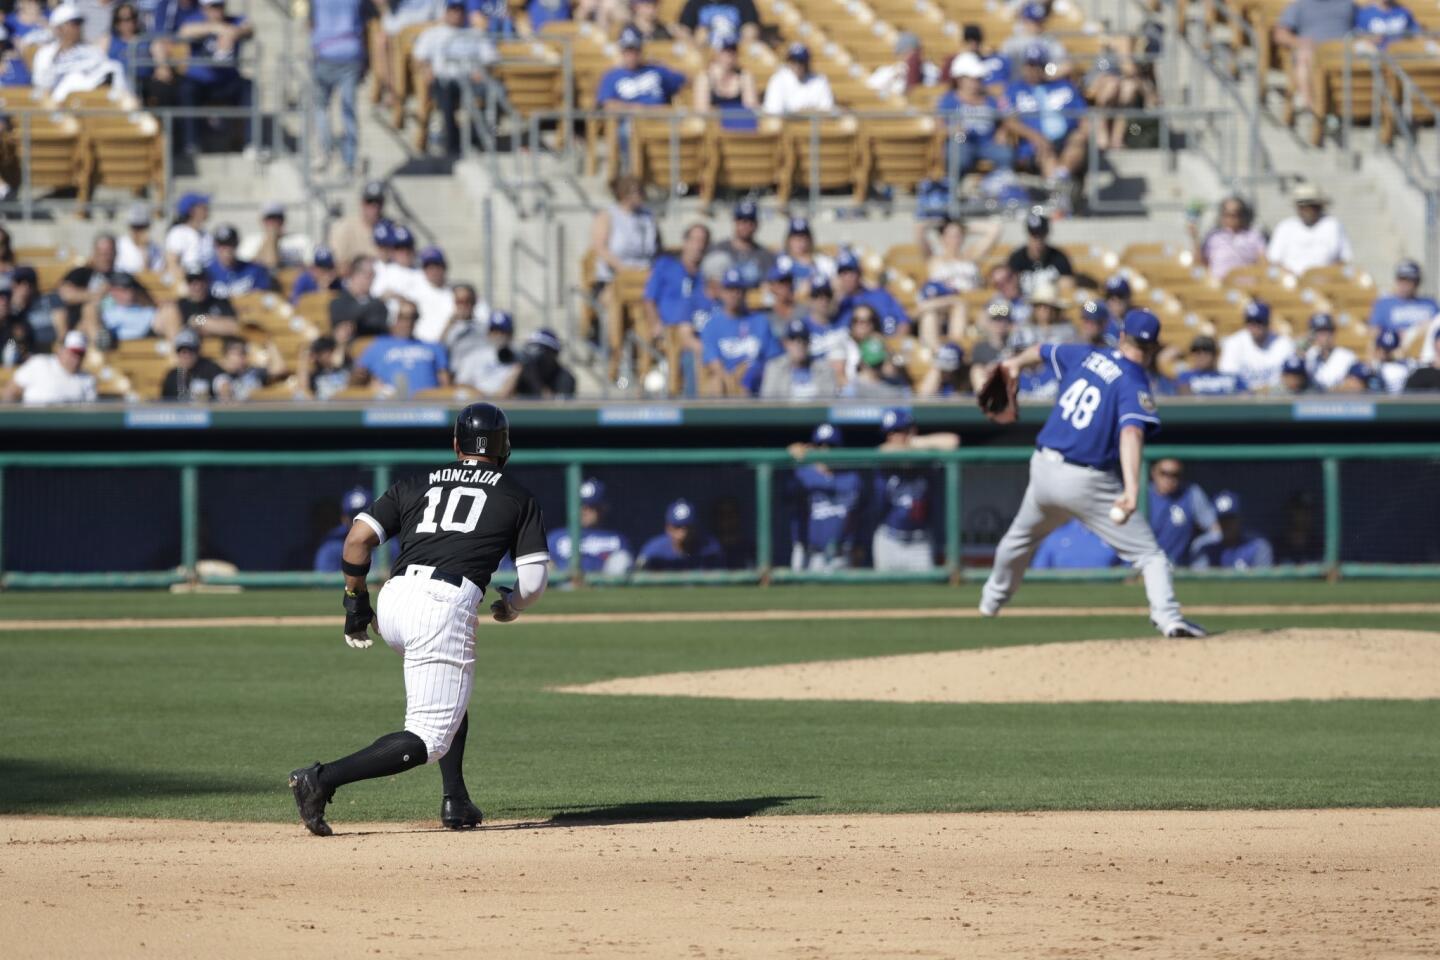 White Sox's Yoan Moncada leads off first as Dodgers relief pitcher Brock Stewart throws during the fourth inning of a spring training baseball game, Friday, March 2, 2018, in Glendale, Ariz.